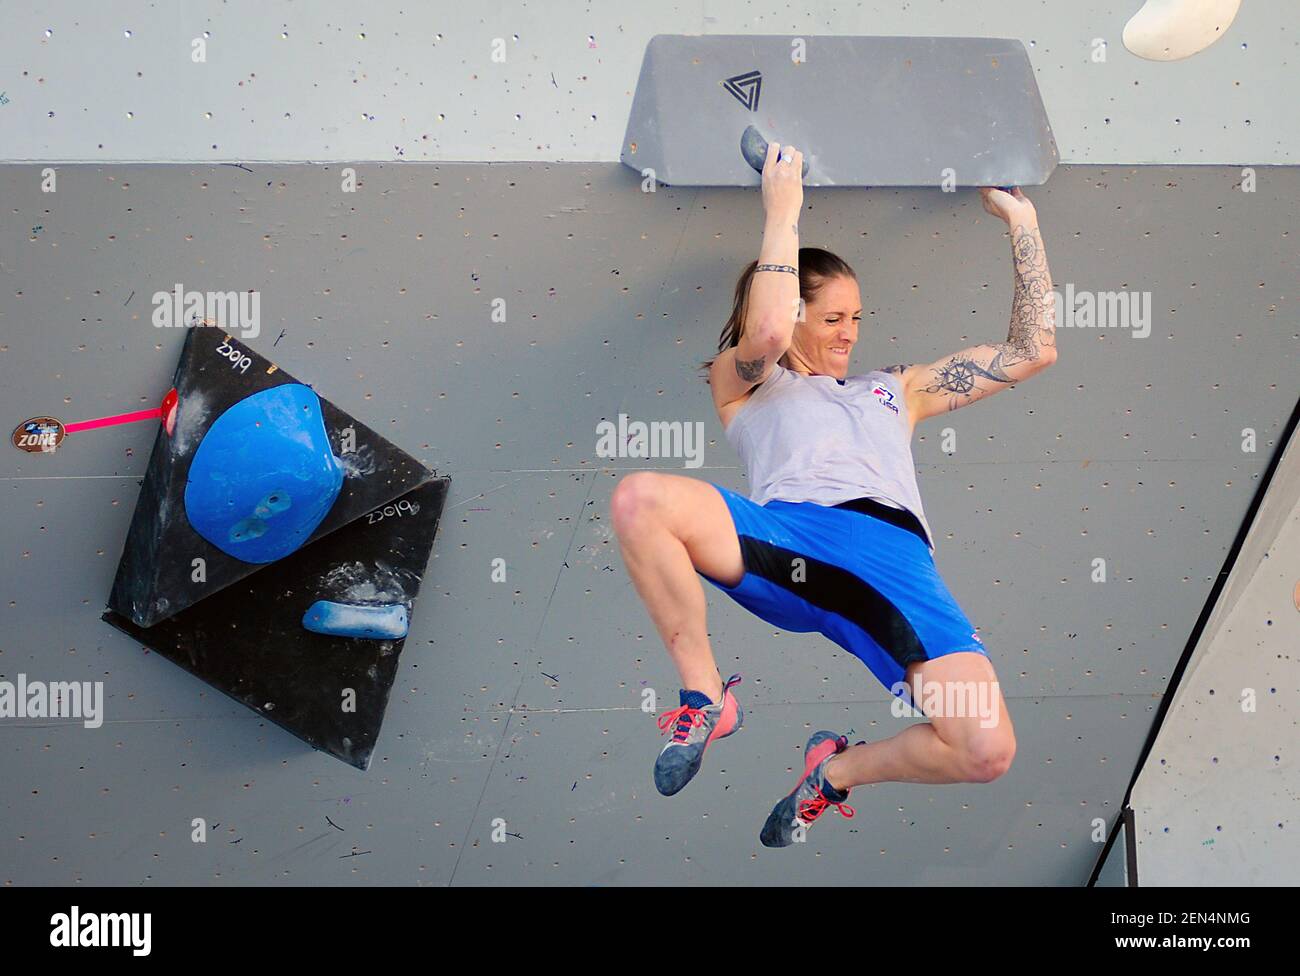 June 7, 2019: Team USA climber, Alex Johnson, in IFSC World Cup qualifying  action during the GoPro Mountain Games. Adventure athletes from around the  world gather in Vail, Colorado each summer for